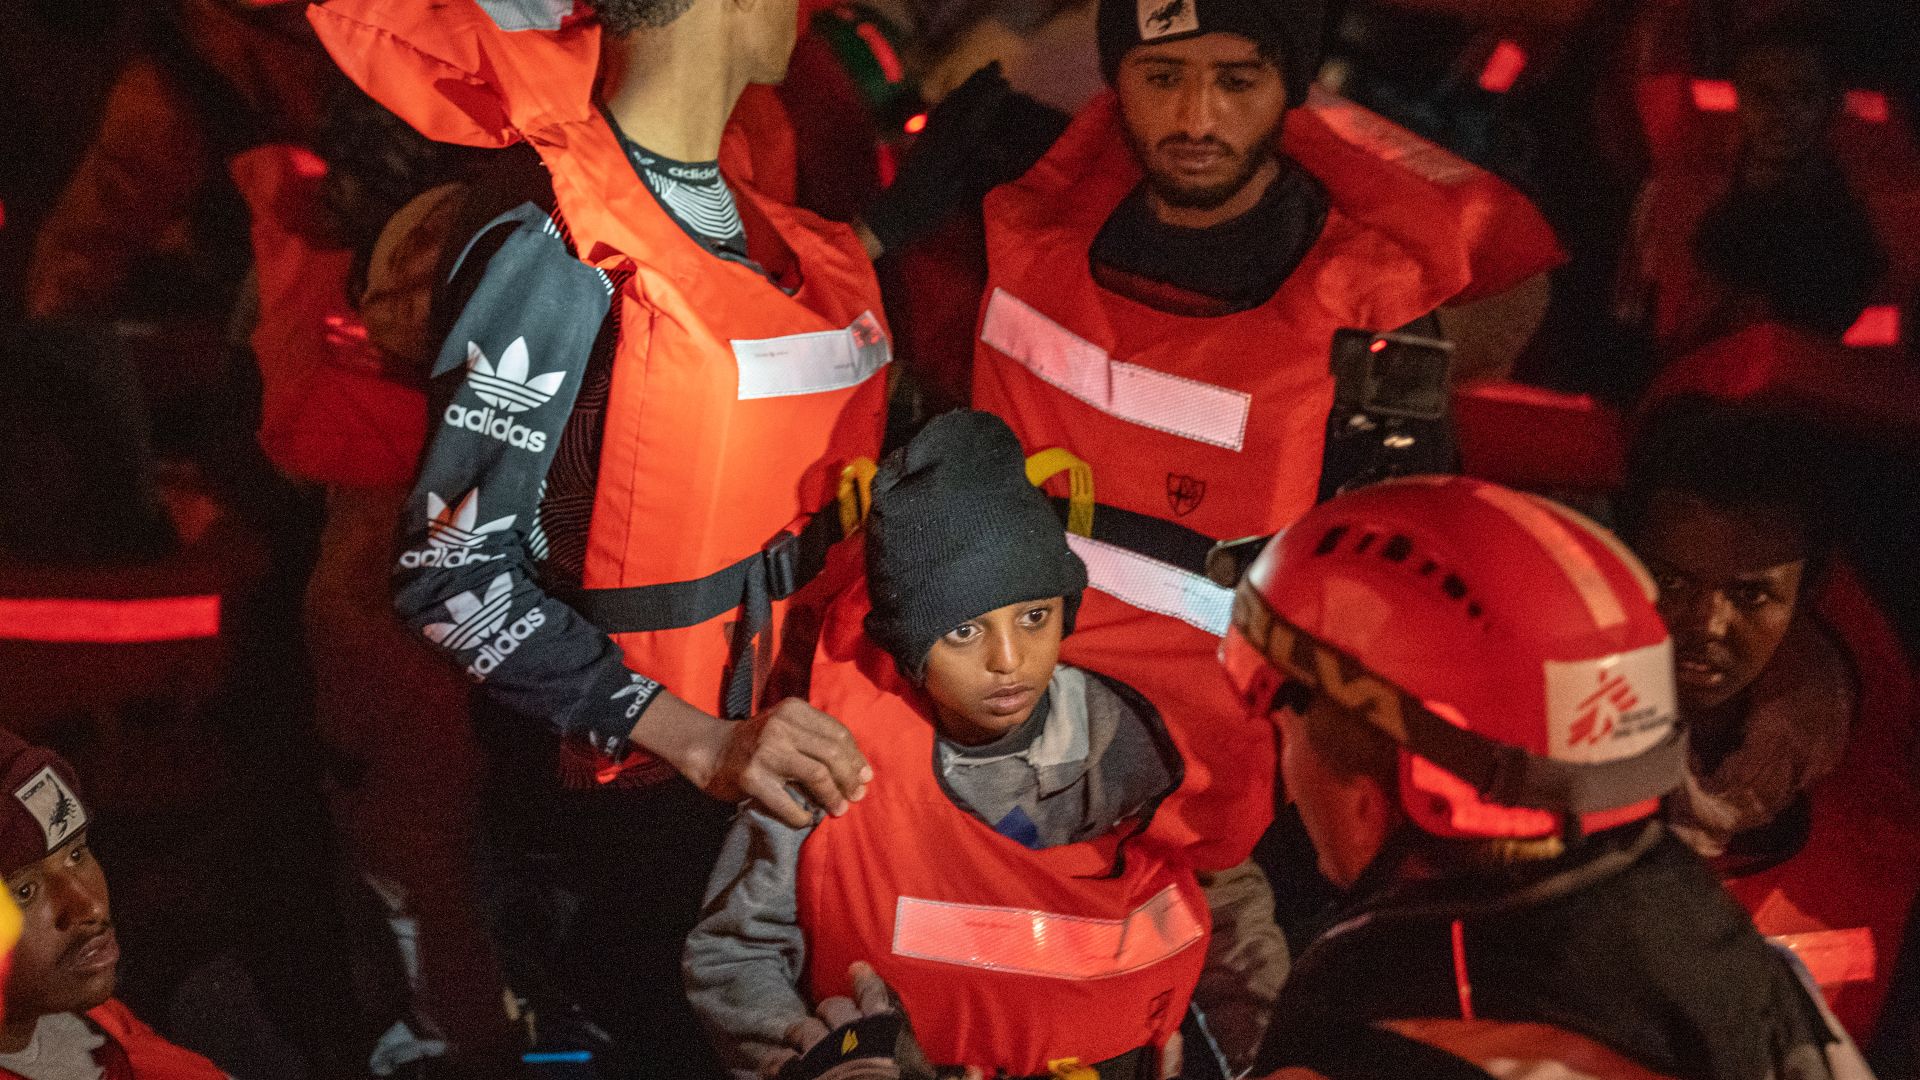 Search and rescue team helping survivors on a boat in the Med Sea